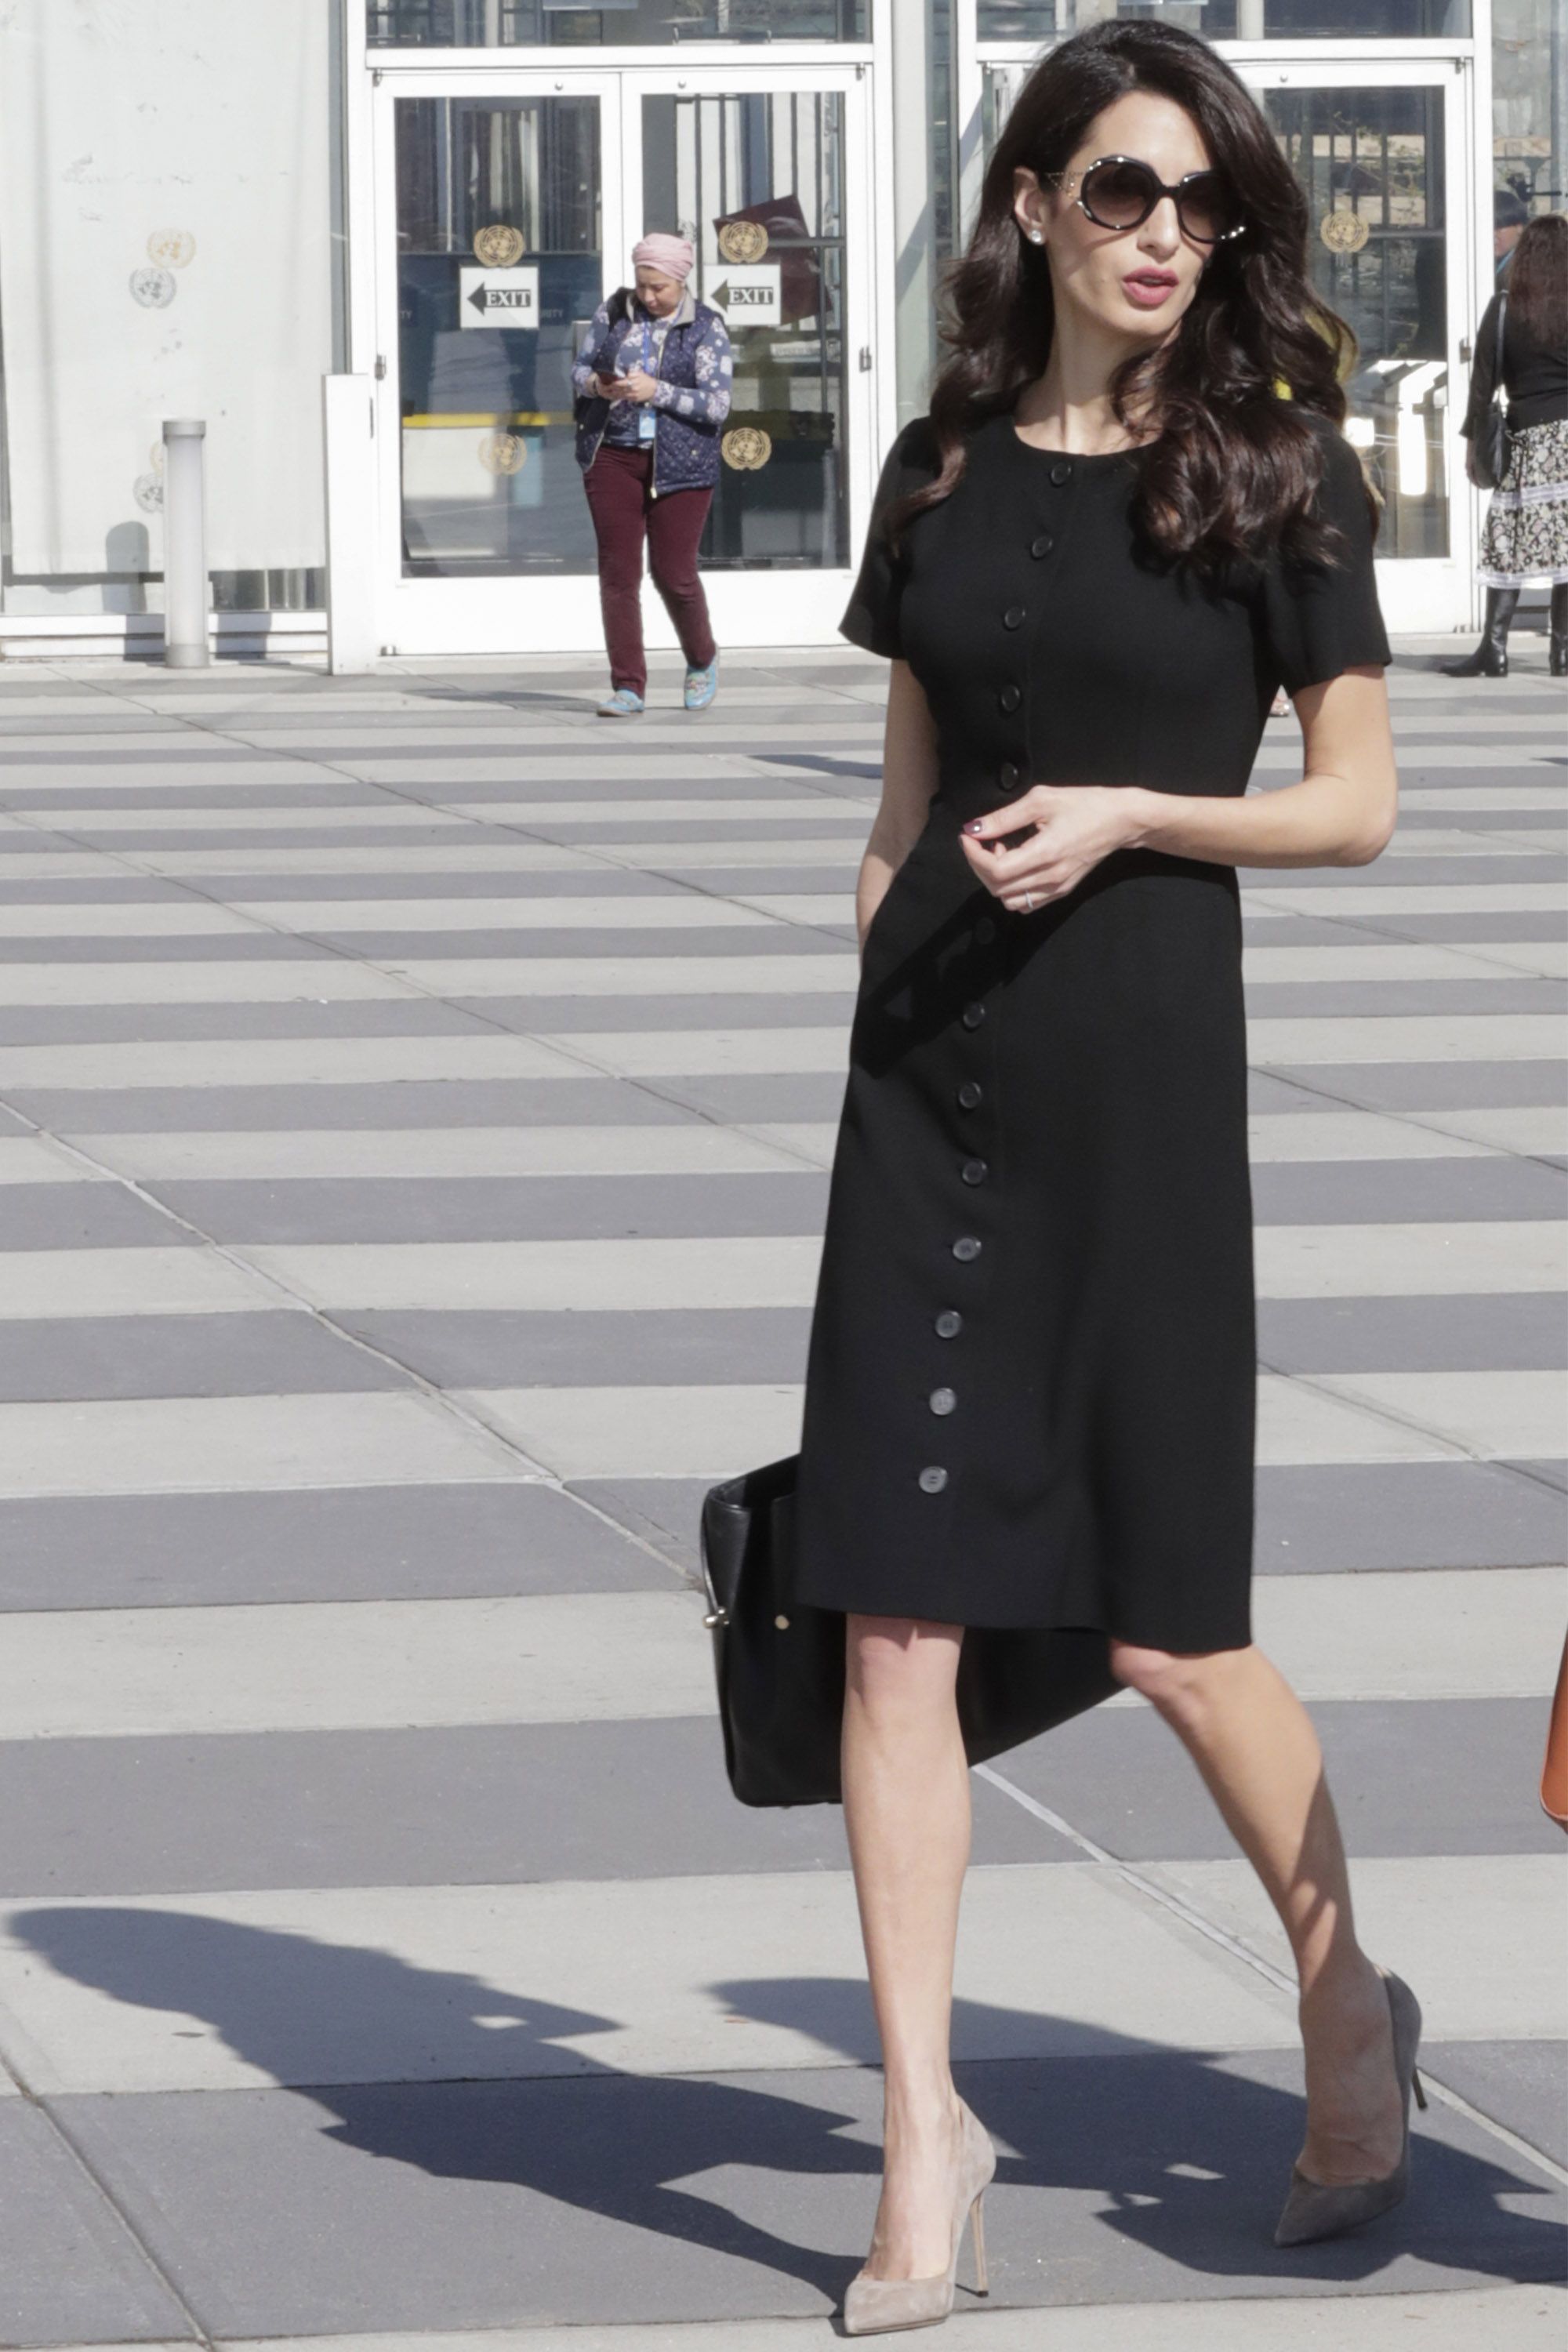 Amal Clooney's Best Looks - Pictures of Amal Clooney's Top Fashion